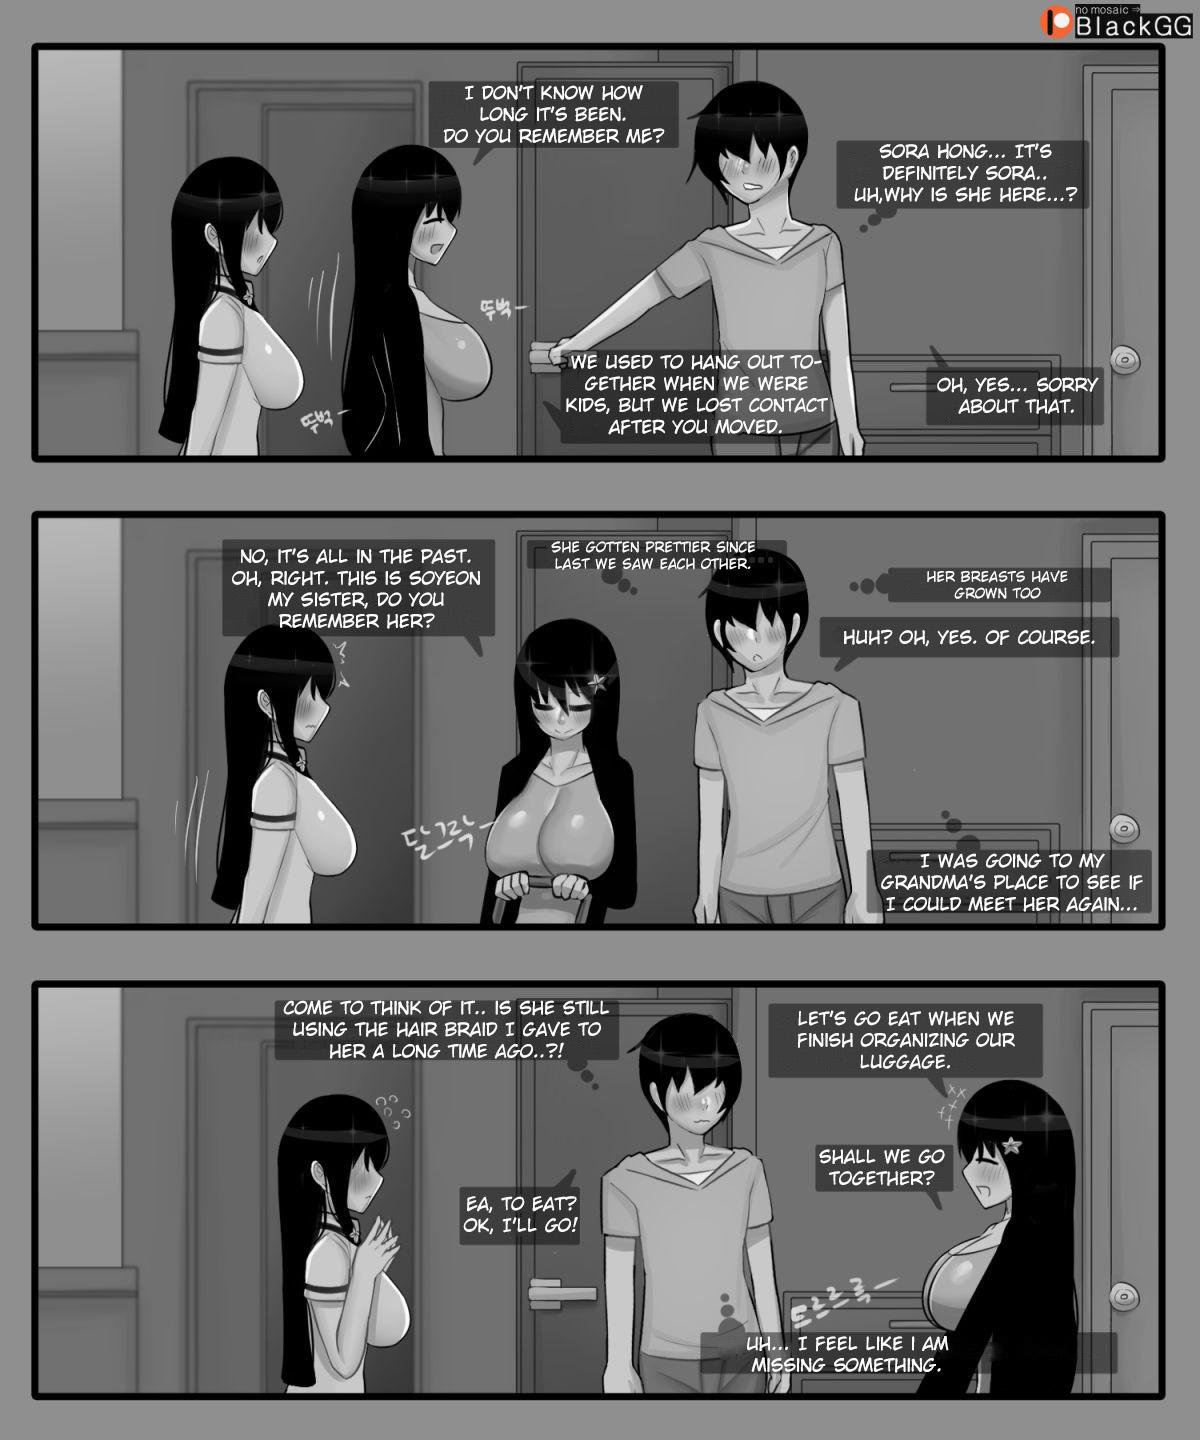 Couple Sex The story of a childhood friend becoming father's lover 1 - Original Gets - Page 7